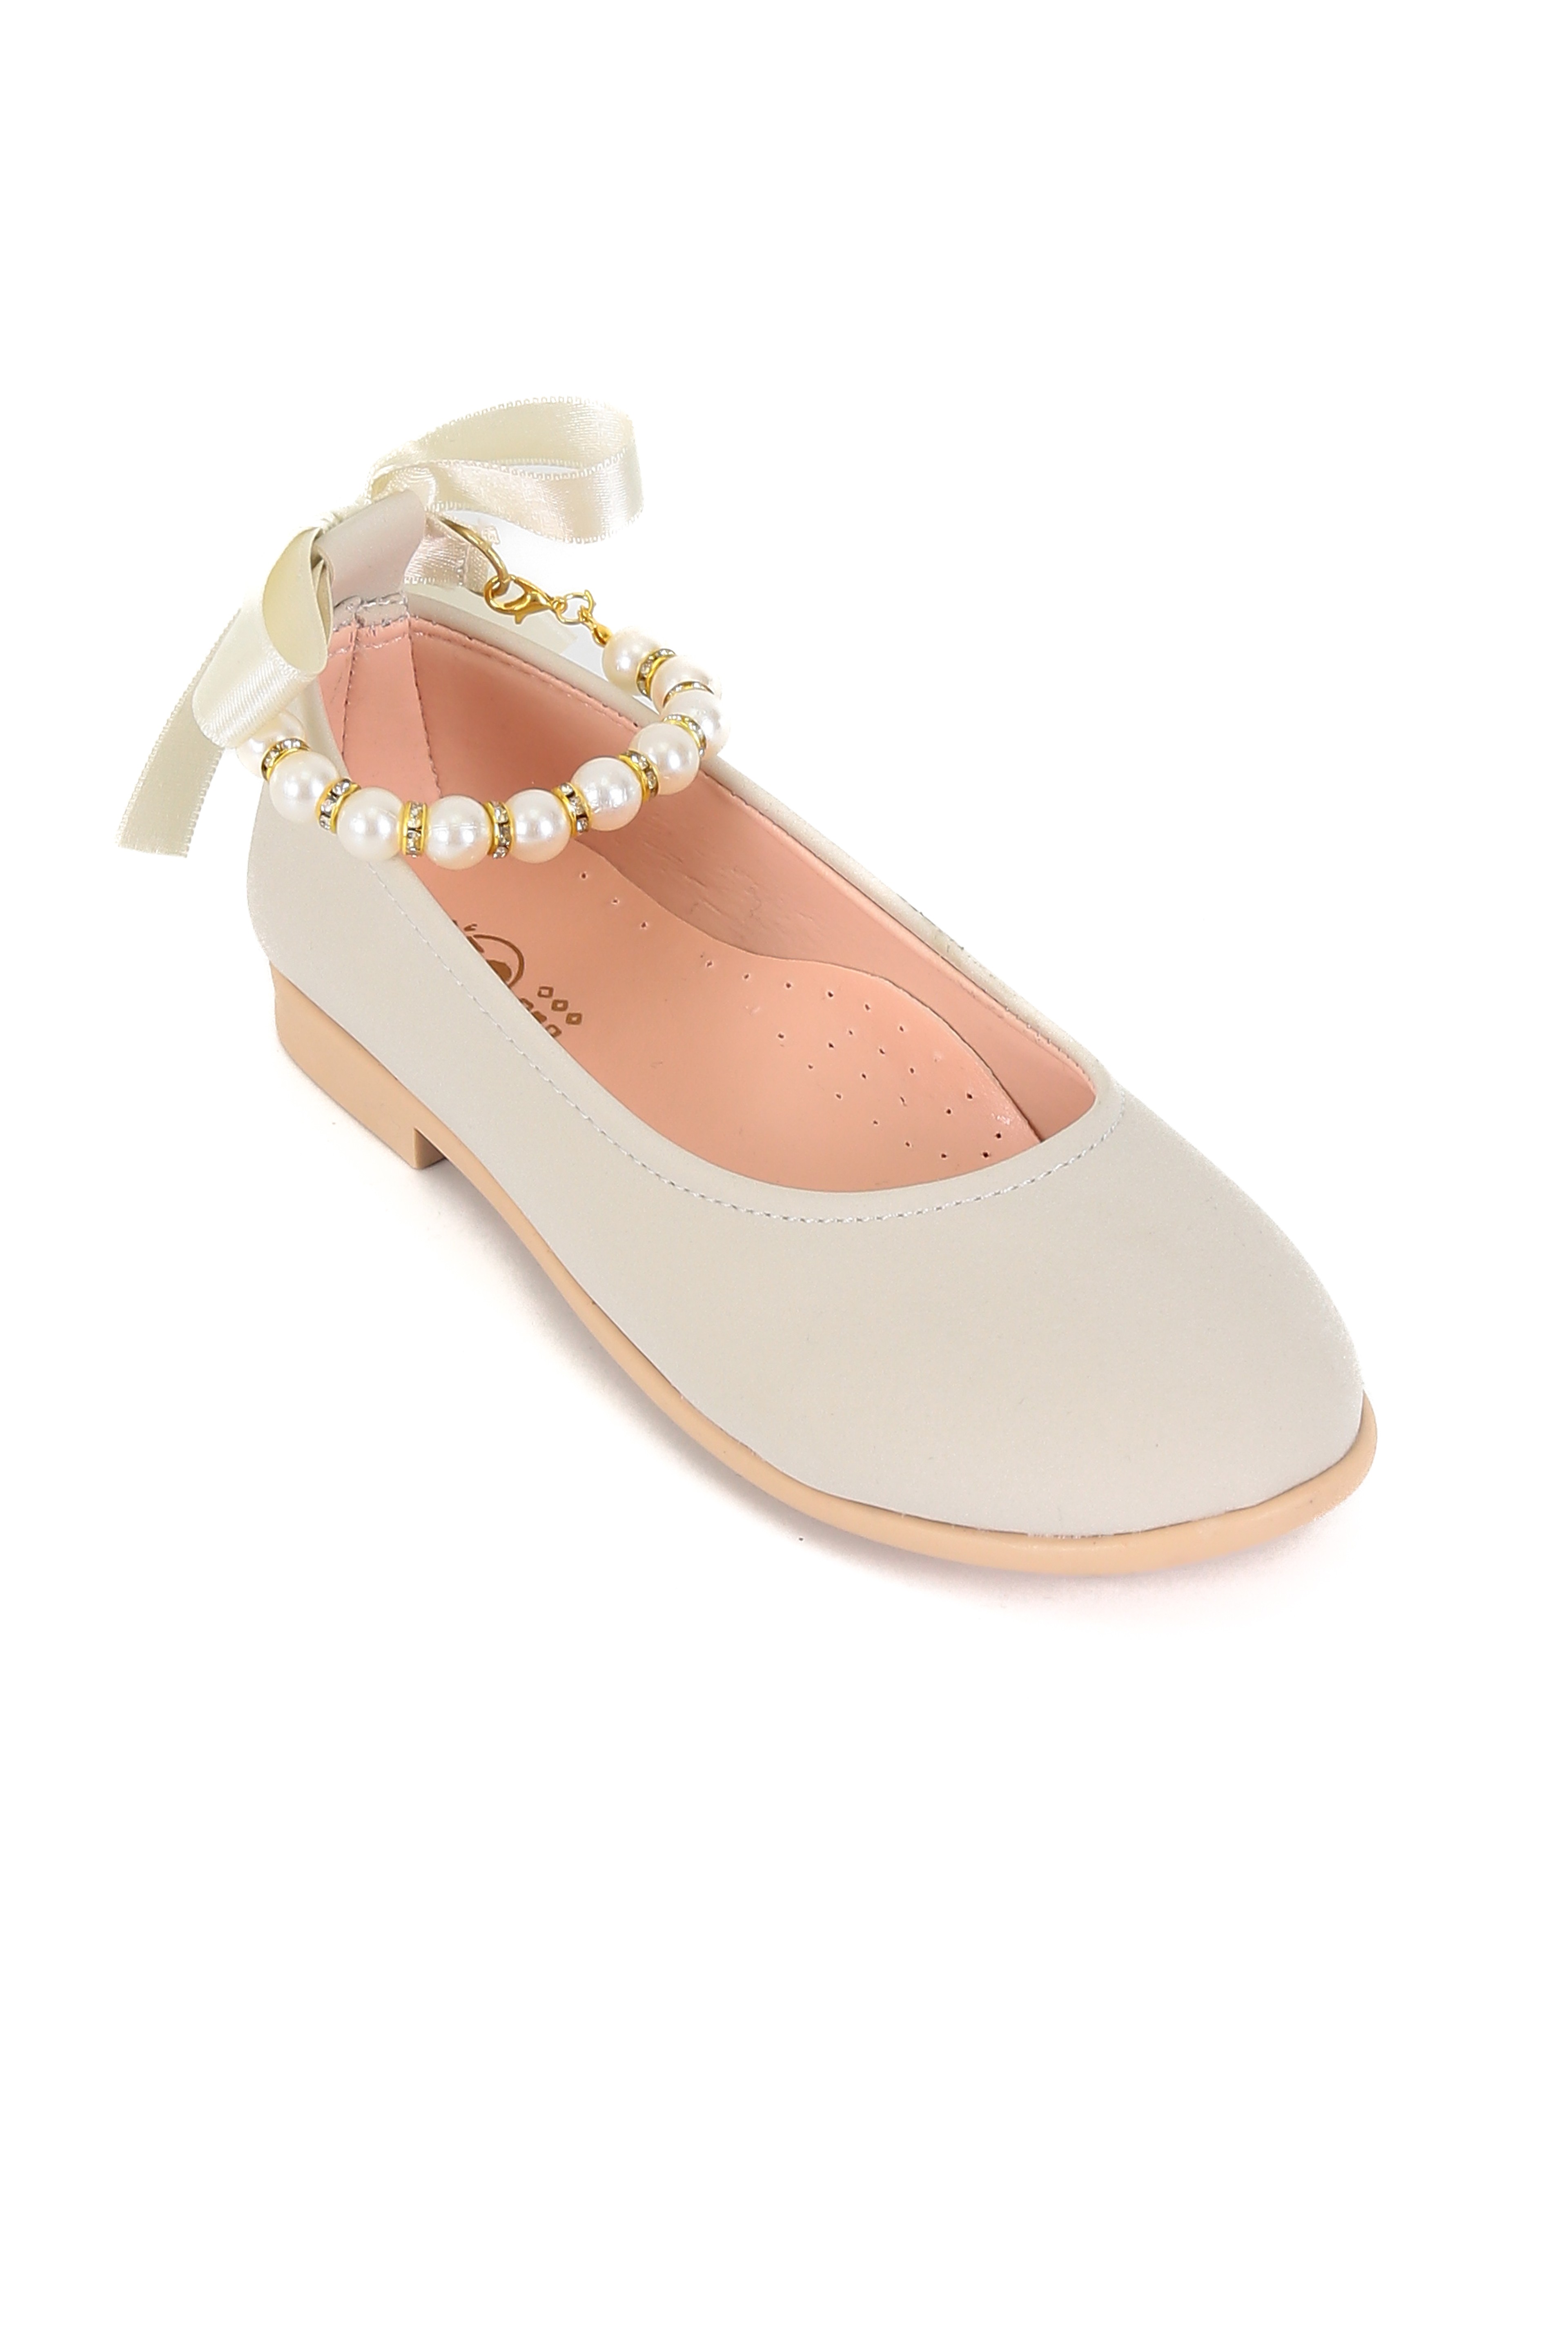 Girls Pearls Flat Mary Jane Shoes - ISABEL